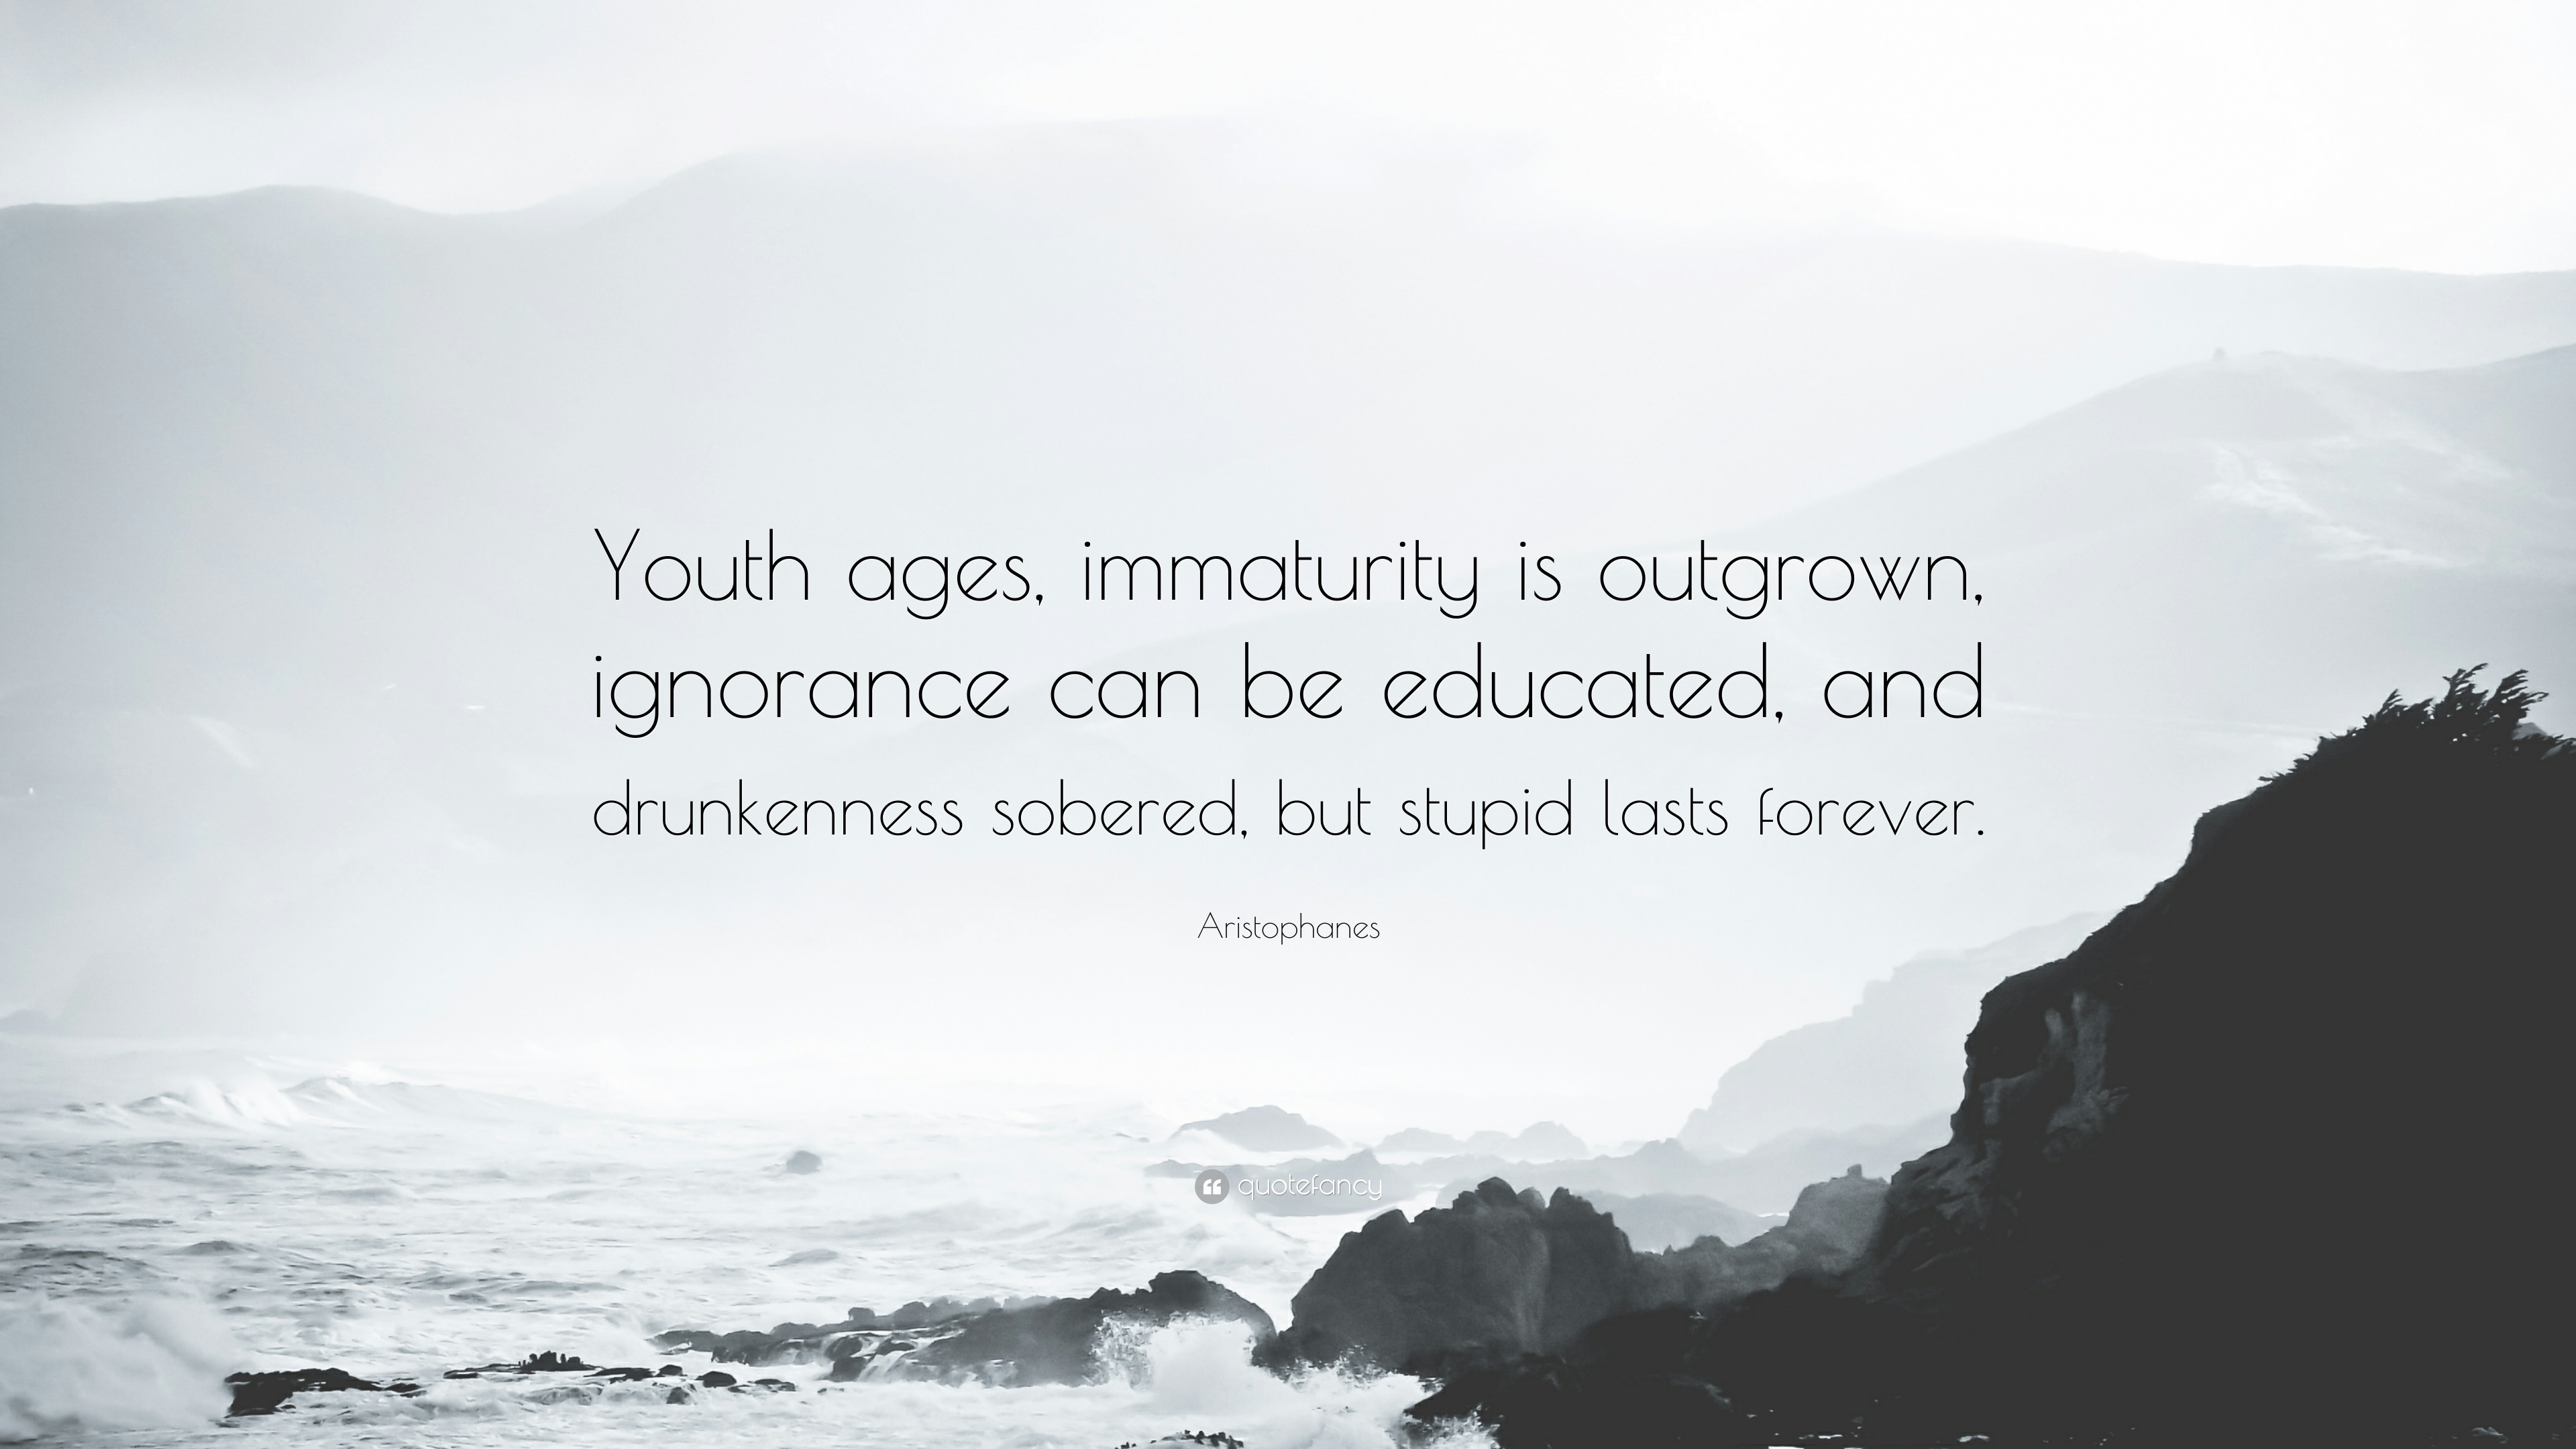 Aristophanes Quote: “Youth ages, immaturity is outgrown, ignorance ...